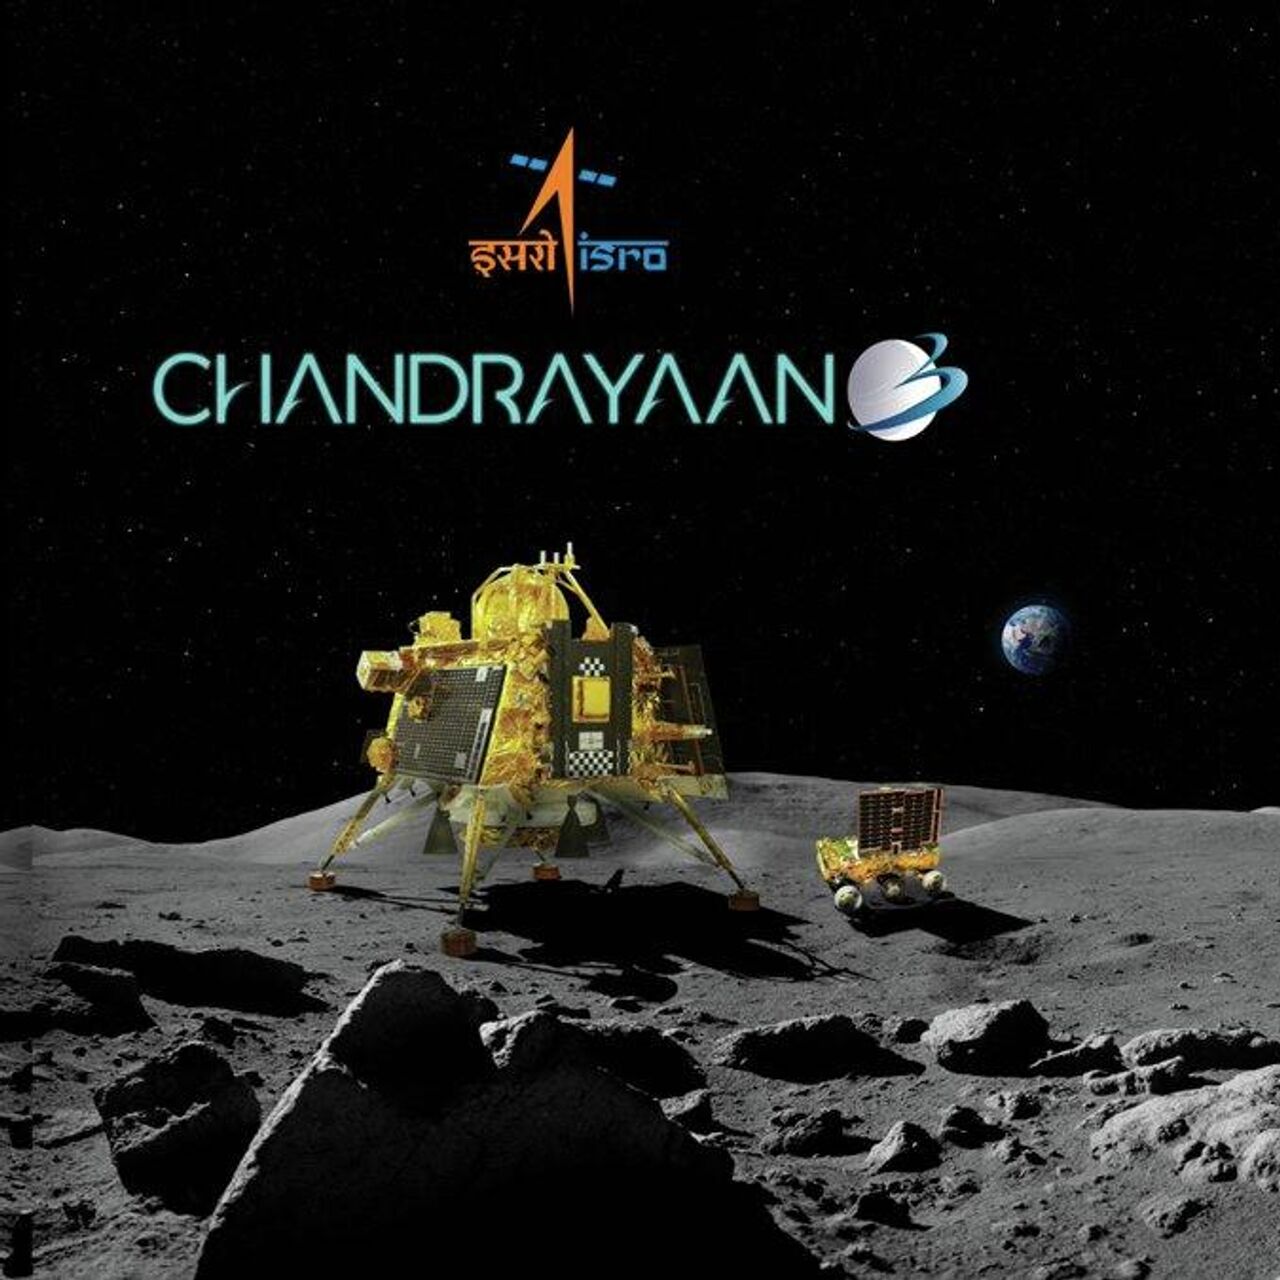 Chandrayaan 3 School Projects Ideas and Suggestions for Students